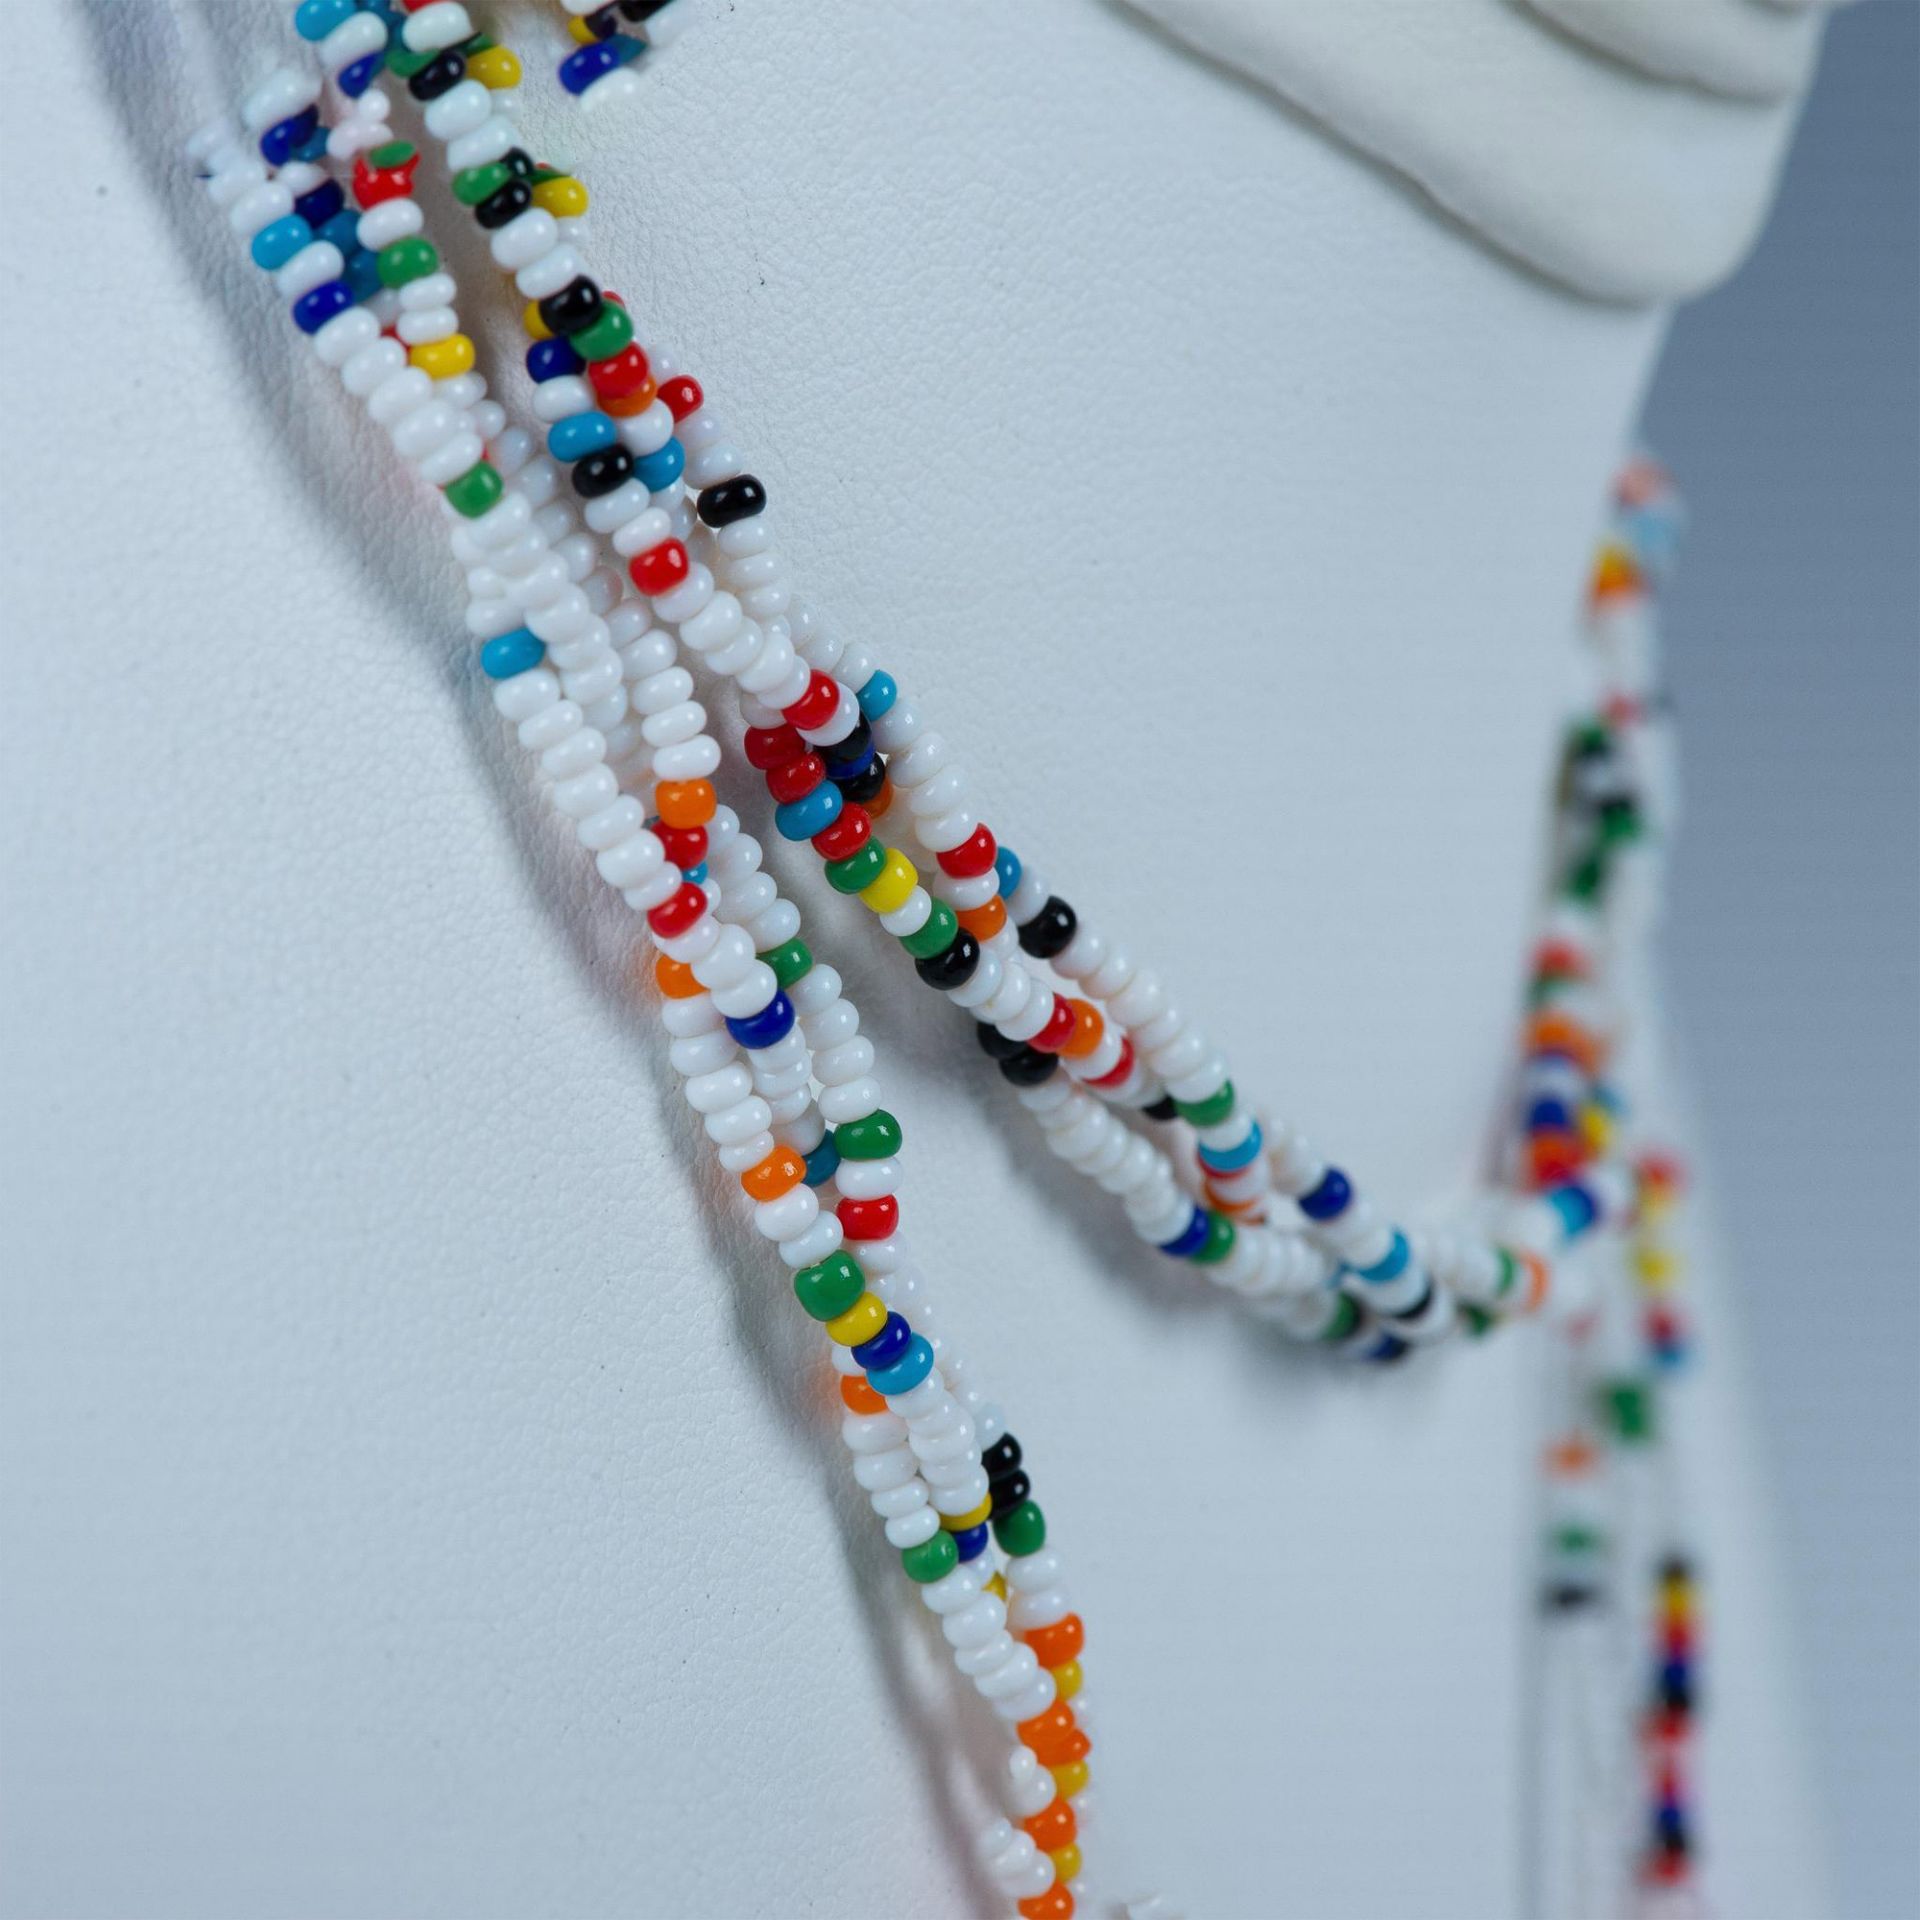 Native American Colorful Handmade Beaded Tassel Necklace - Image 4 of 4